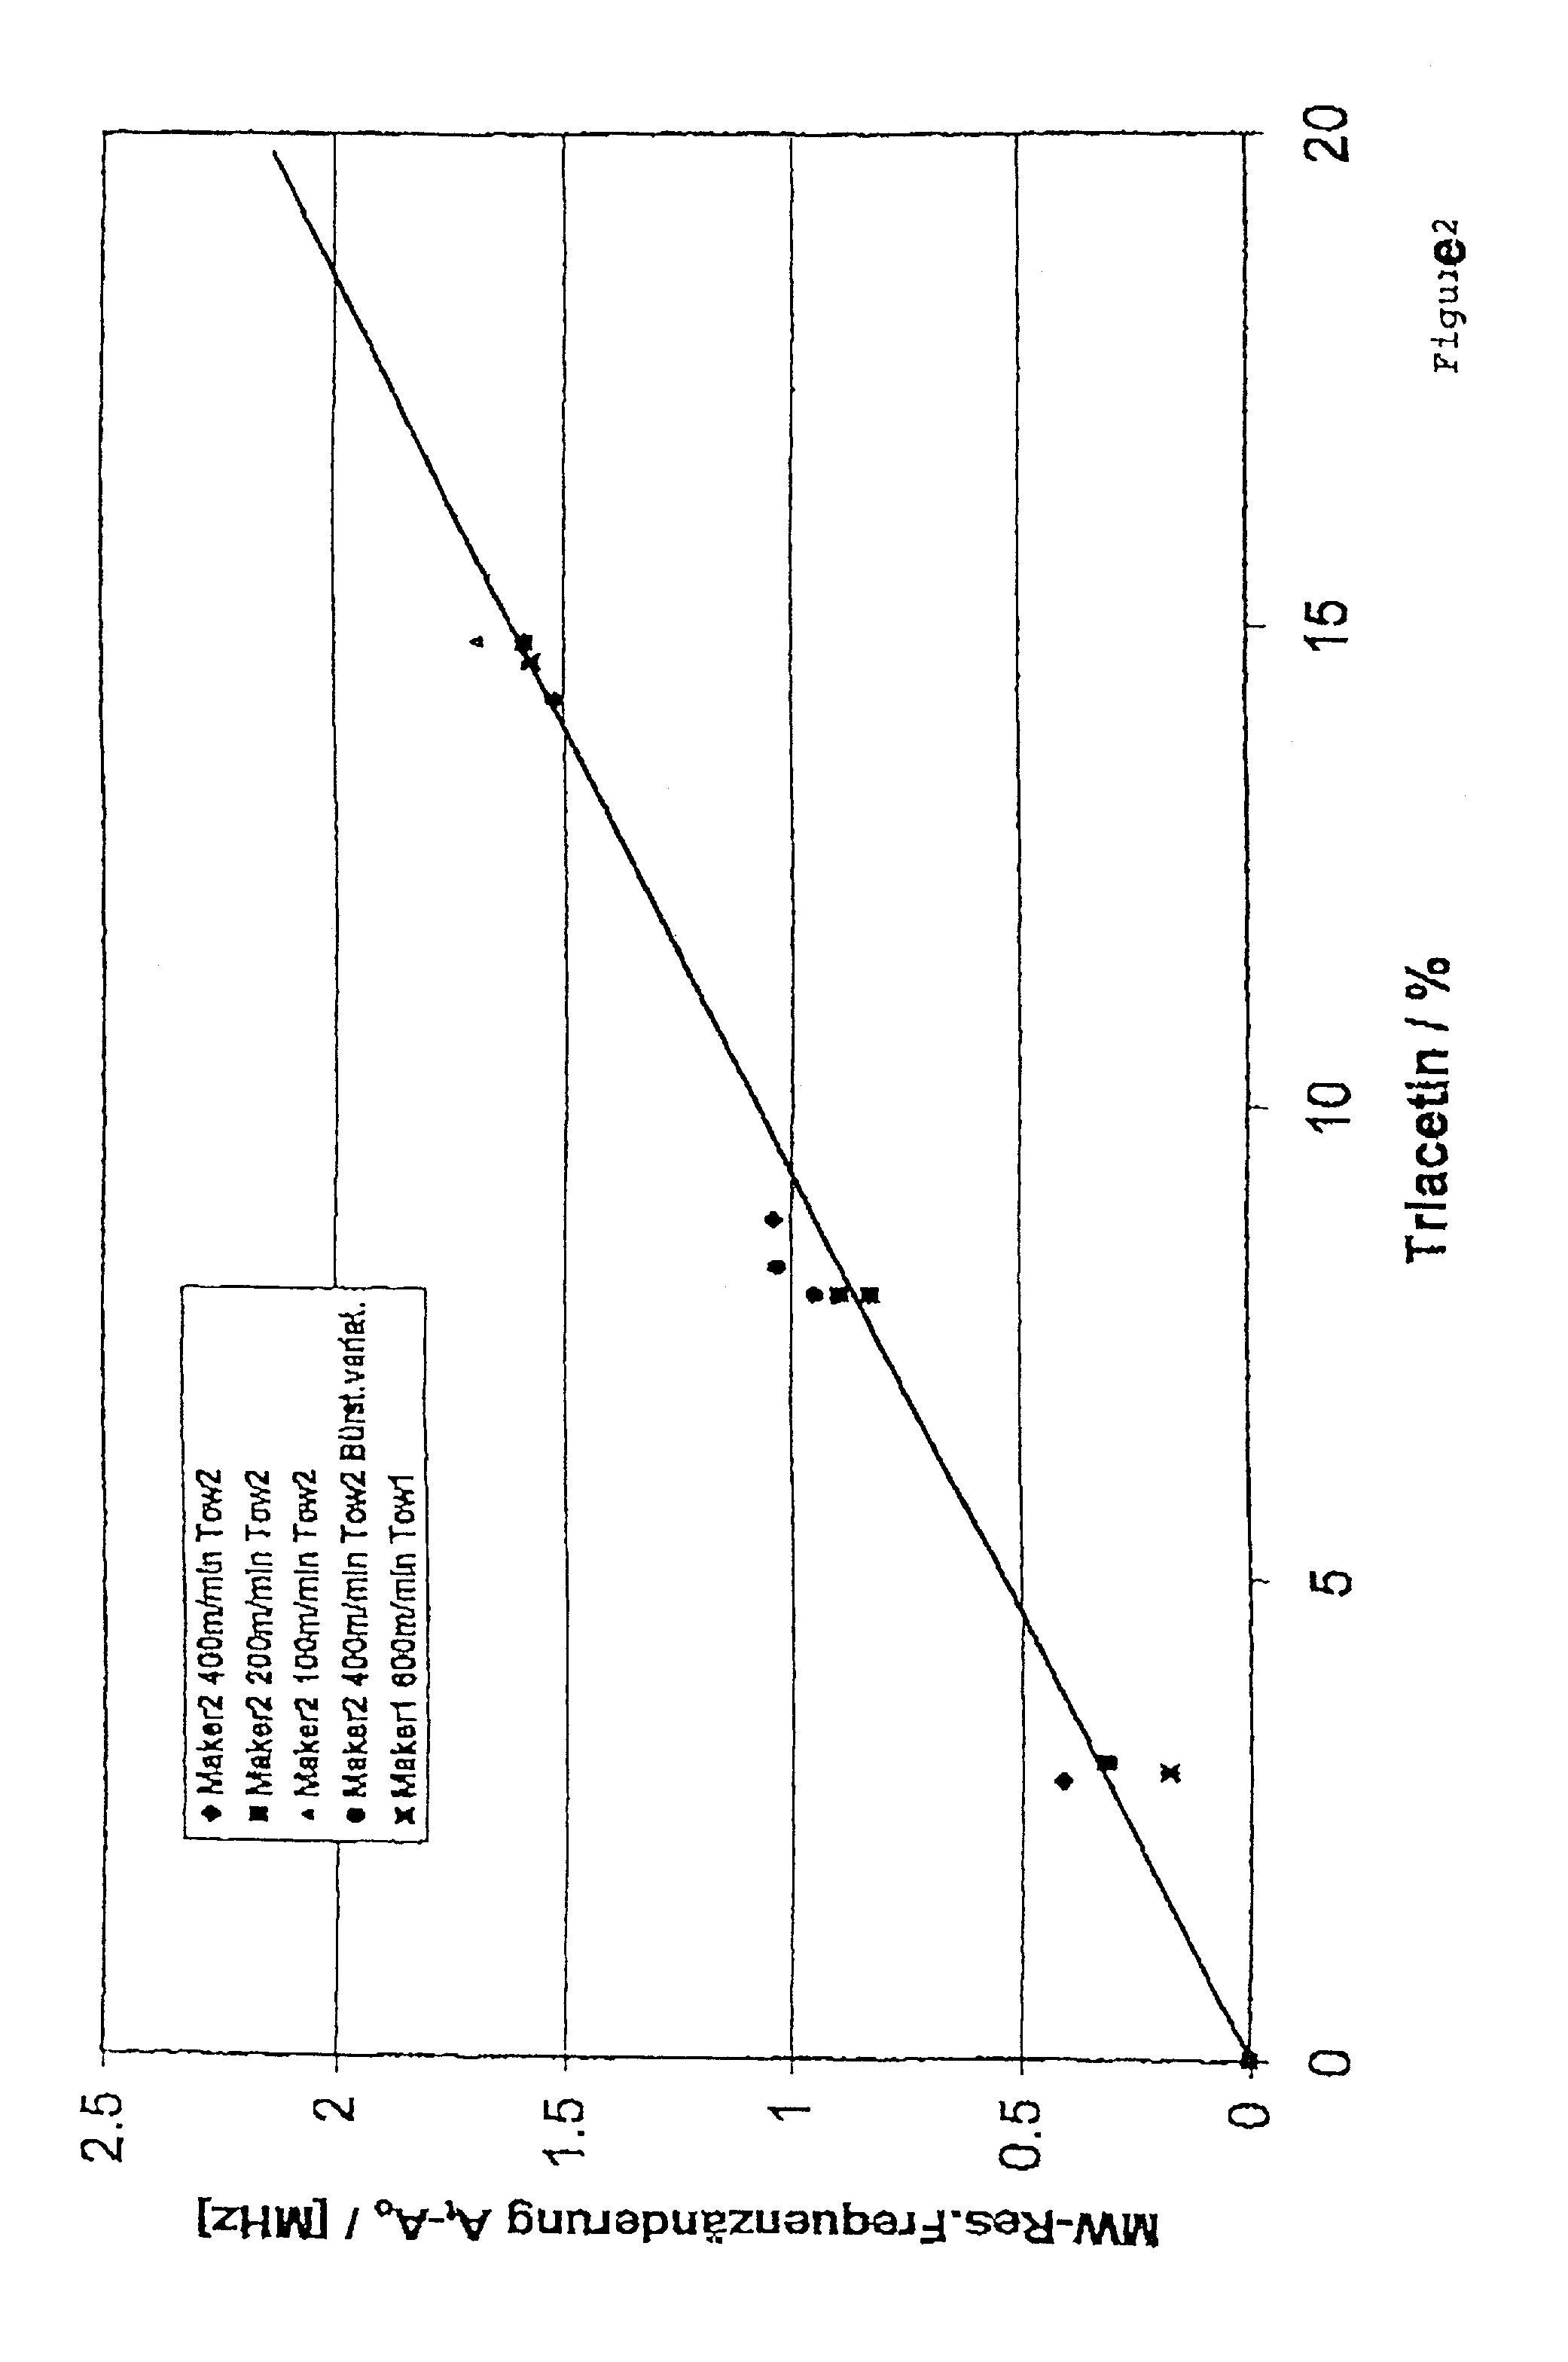 Method and apparatus for determining the triacetin content in filter plugs